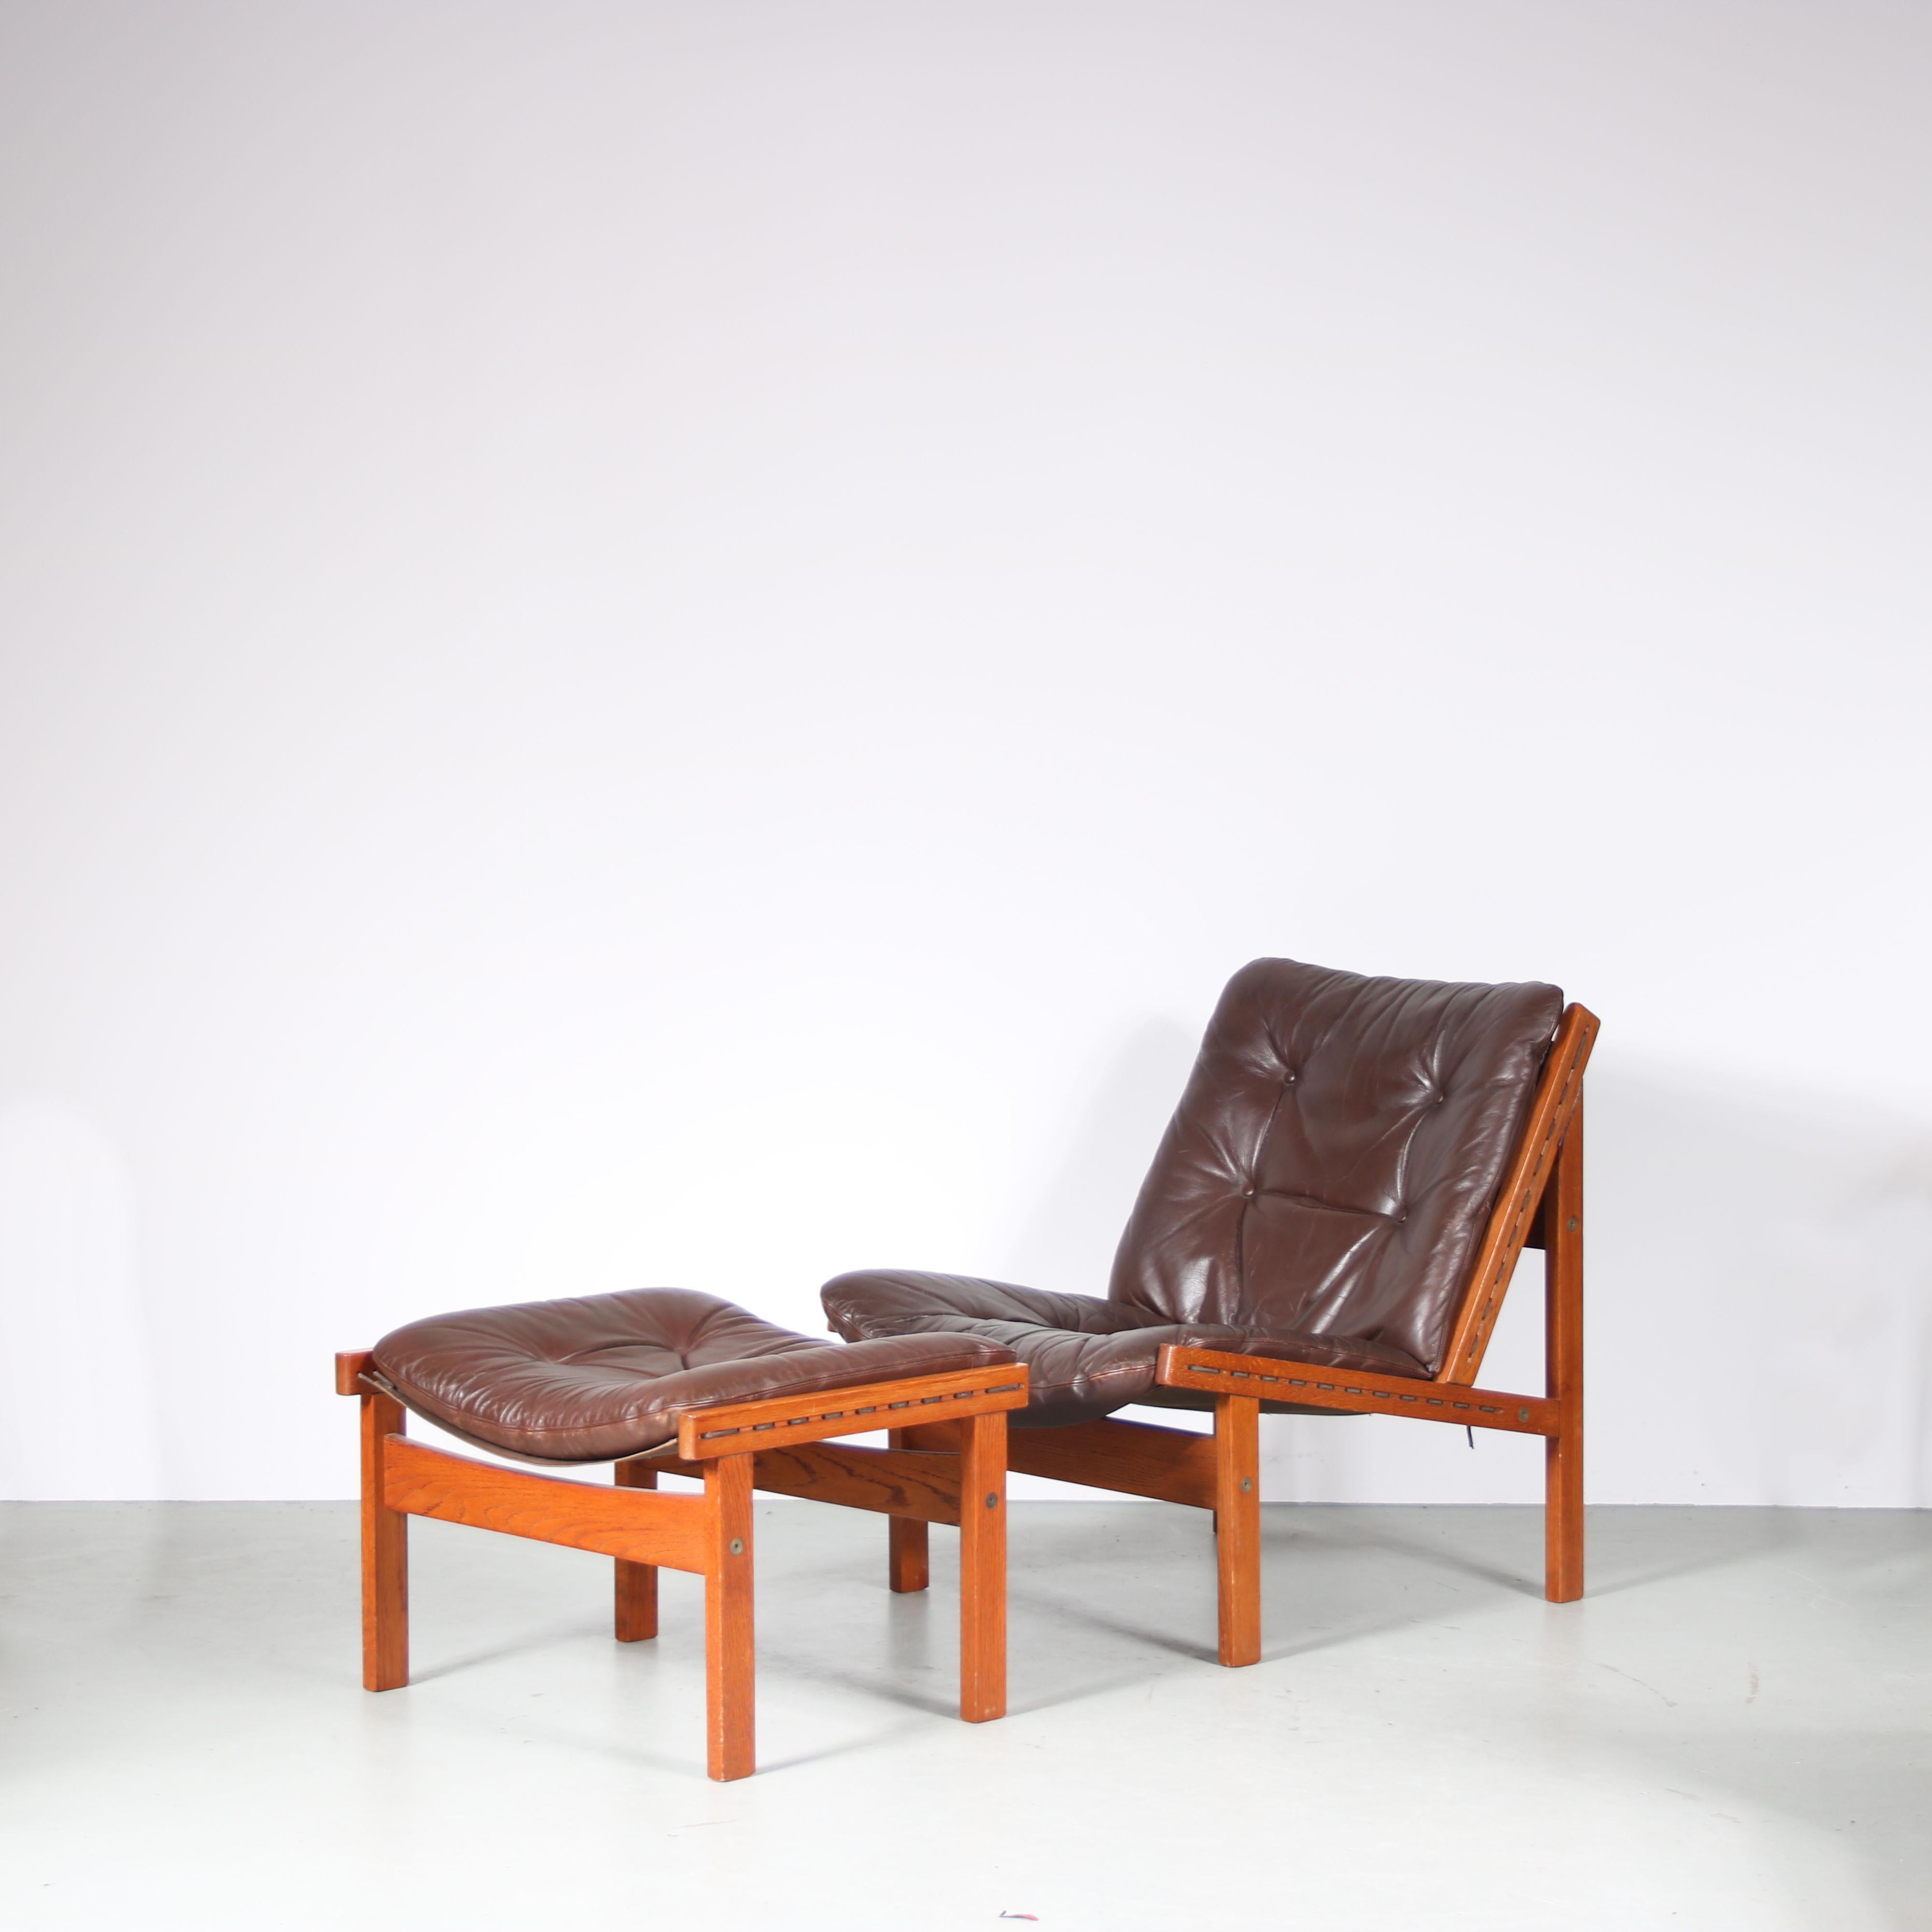 A beautiful “Hunting” chair with matching ottoman (foot stool) designed by Torbjorn Afdal and manufactured by Bruksbo in Norway around 1960.

Both pieces are made of high quality wood in a nice warm brown colour. The seat and back of the chair as